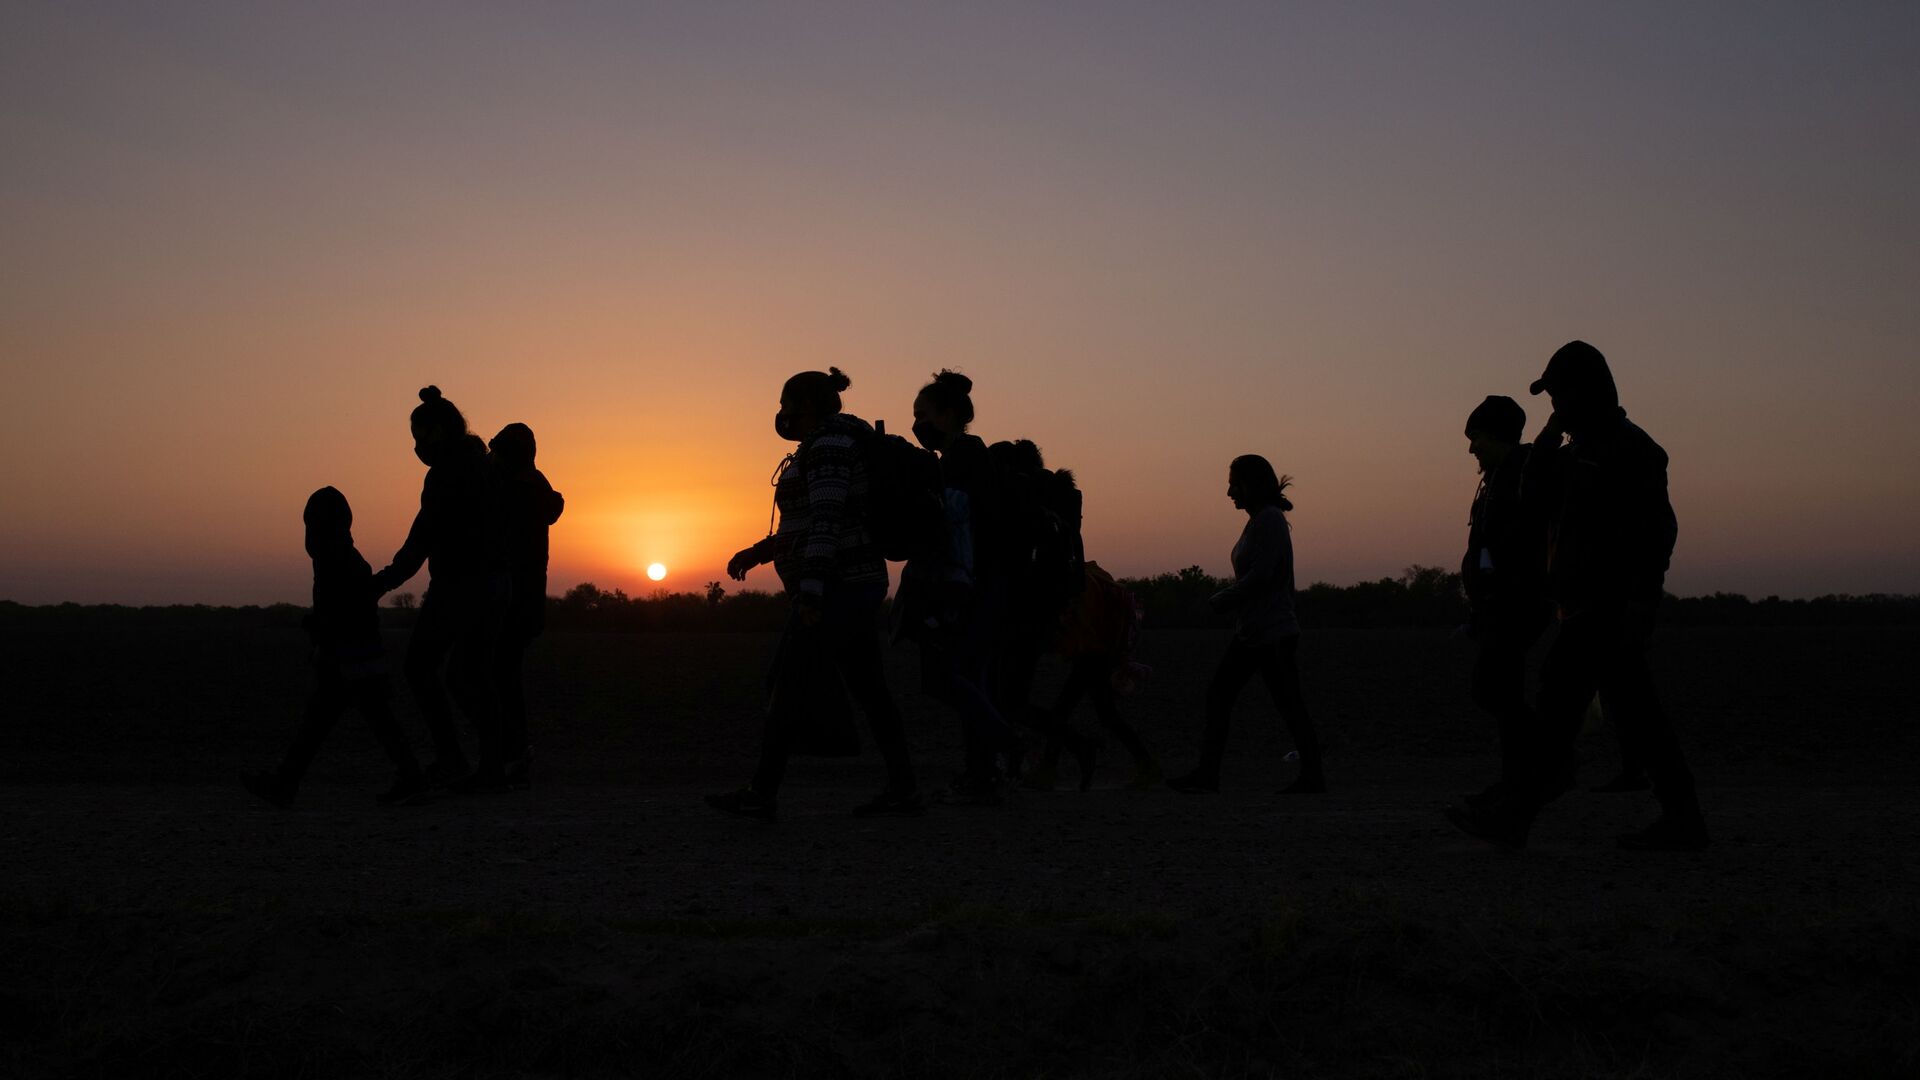 The sun rises as asylum-seeking migrants' families from Honduras and El Salvador walk towards the border wall after crossing the Rio Grande river into the United States from Mexico on a raft, in Penitas, Texas, U.S., March 26, 2021 - Sputnik International, 1920, 07.06.2021